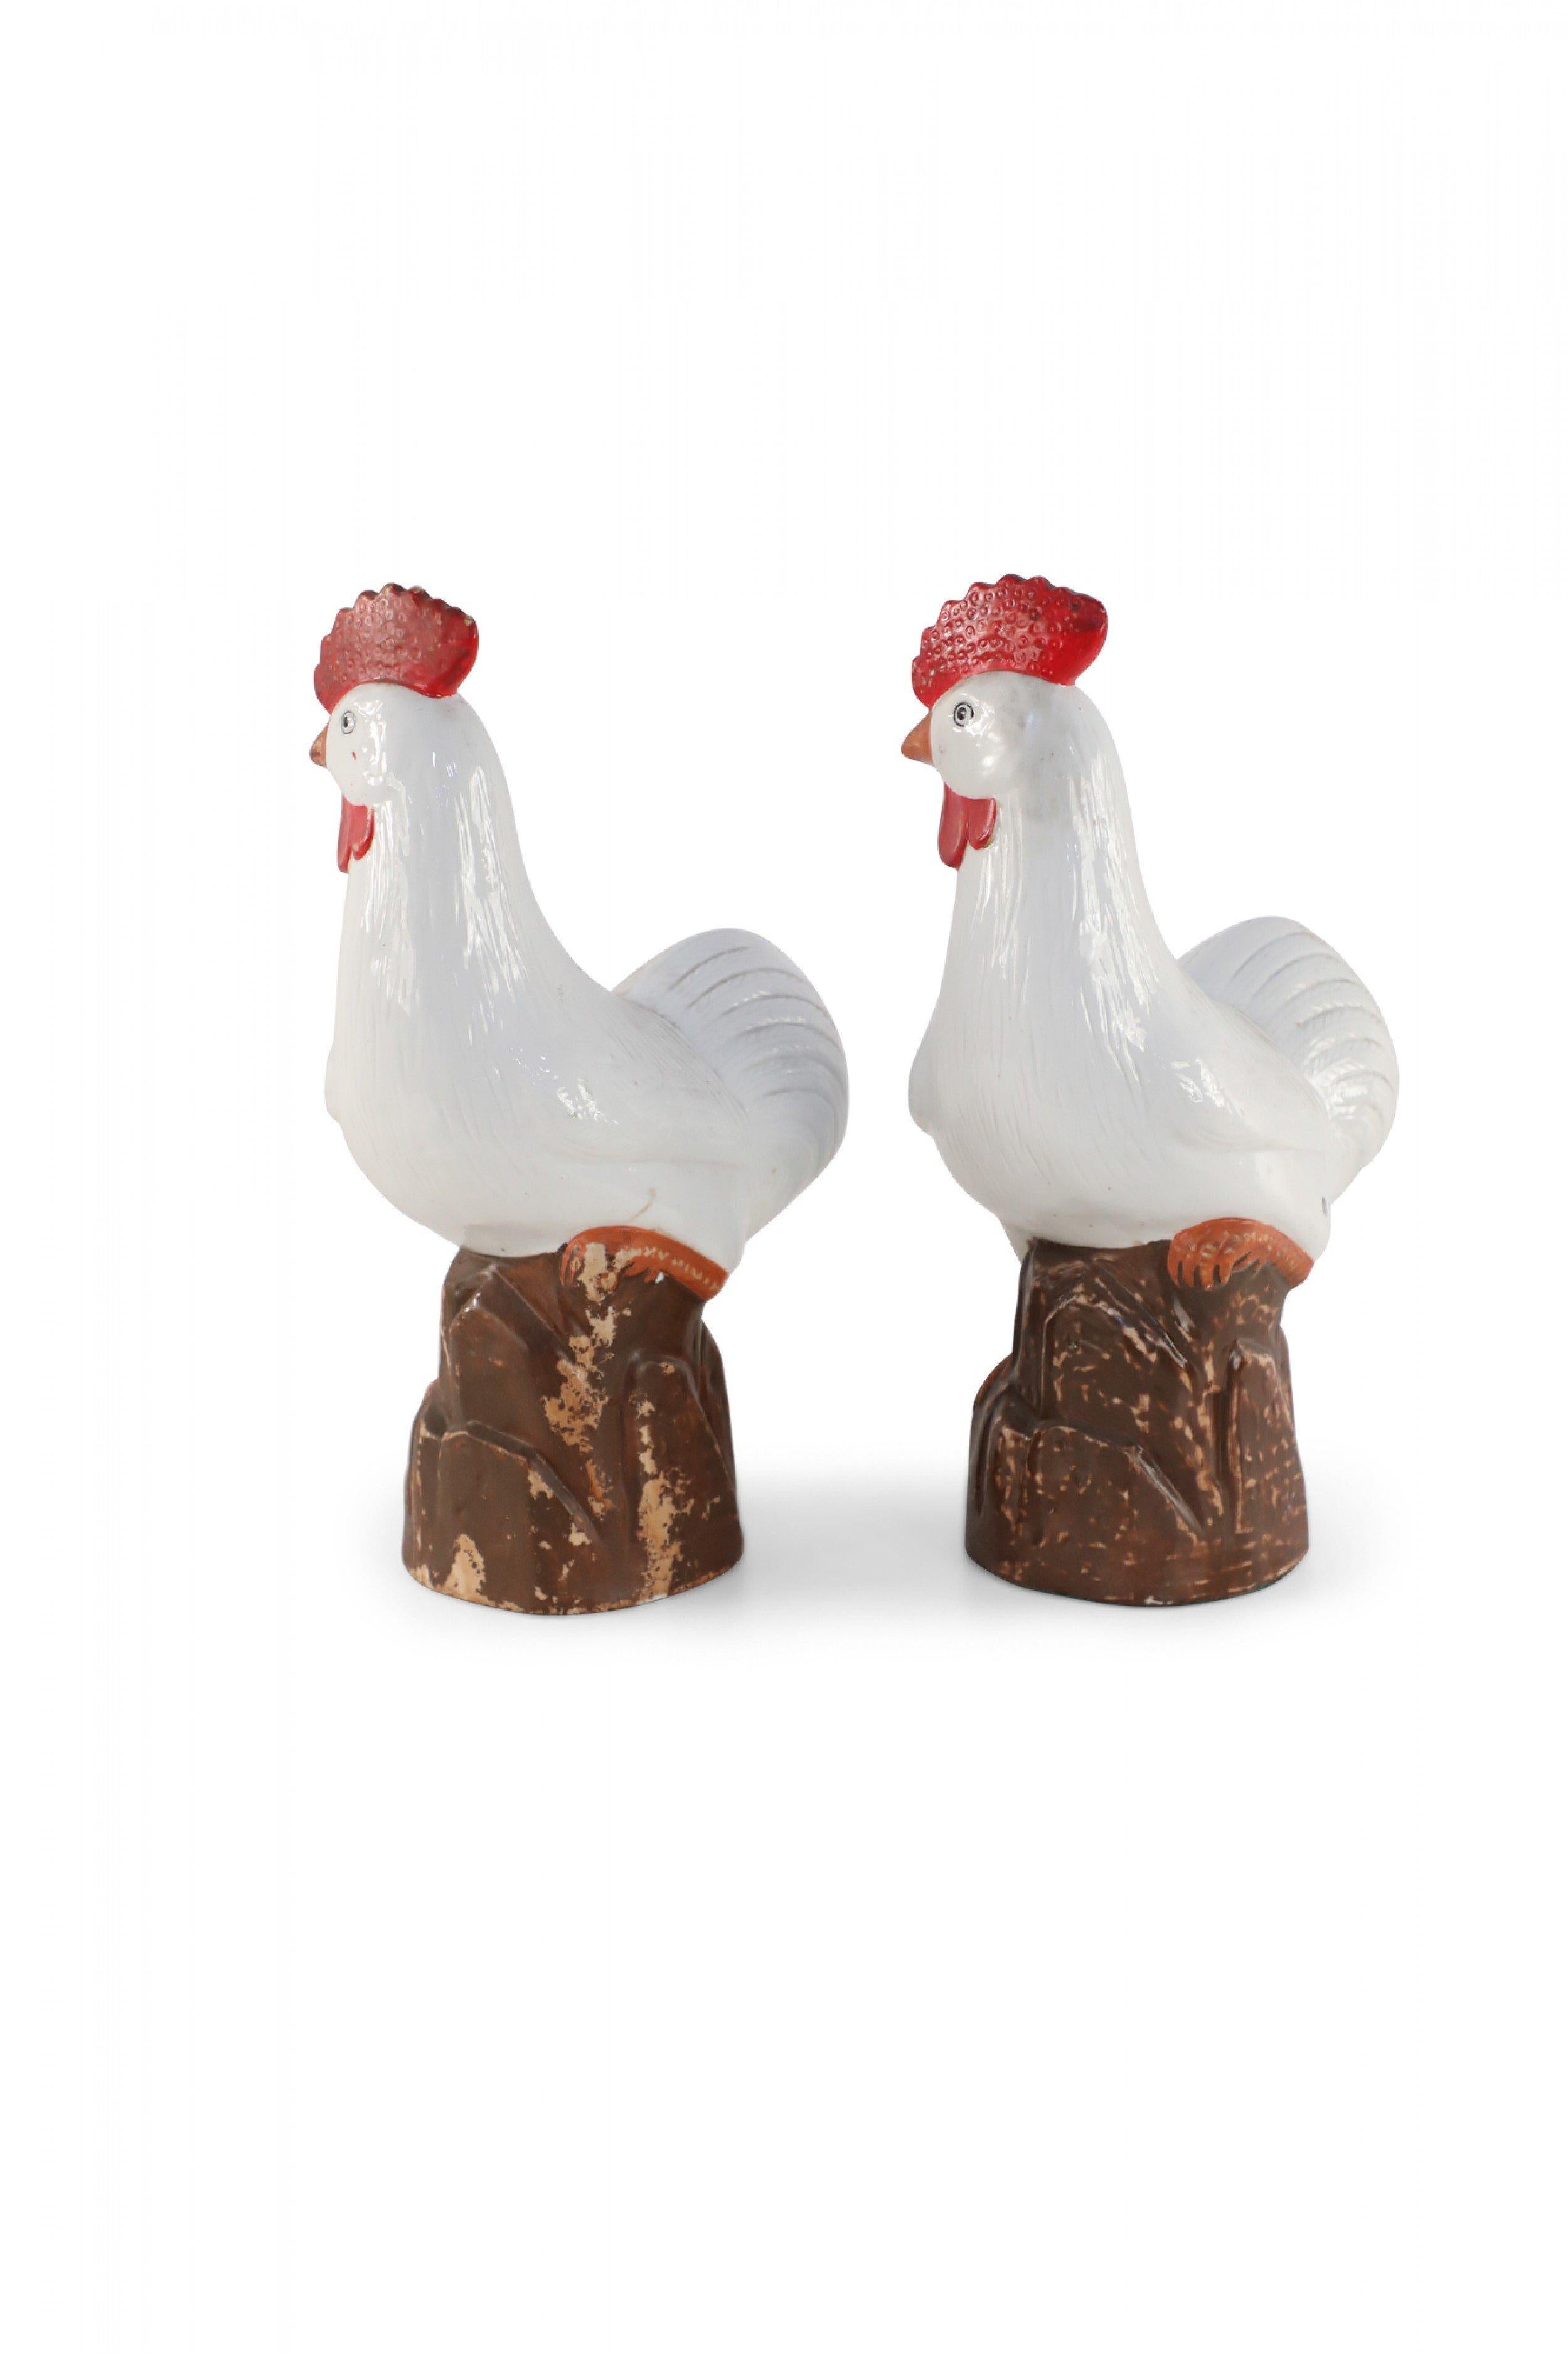 Pair of antique Chinese (mid 20th century) white porcelain chickens, detailed with tonal feathers and red features and sculpted perched on rocks (priced as pair).
  